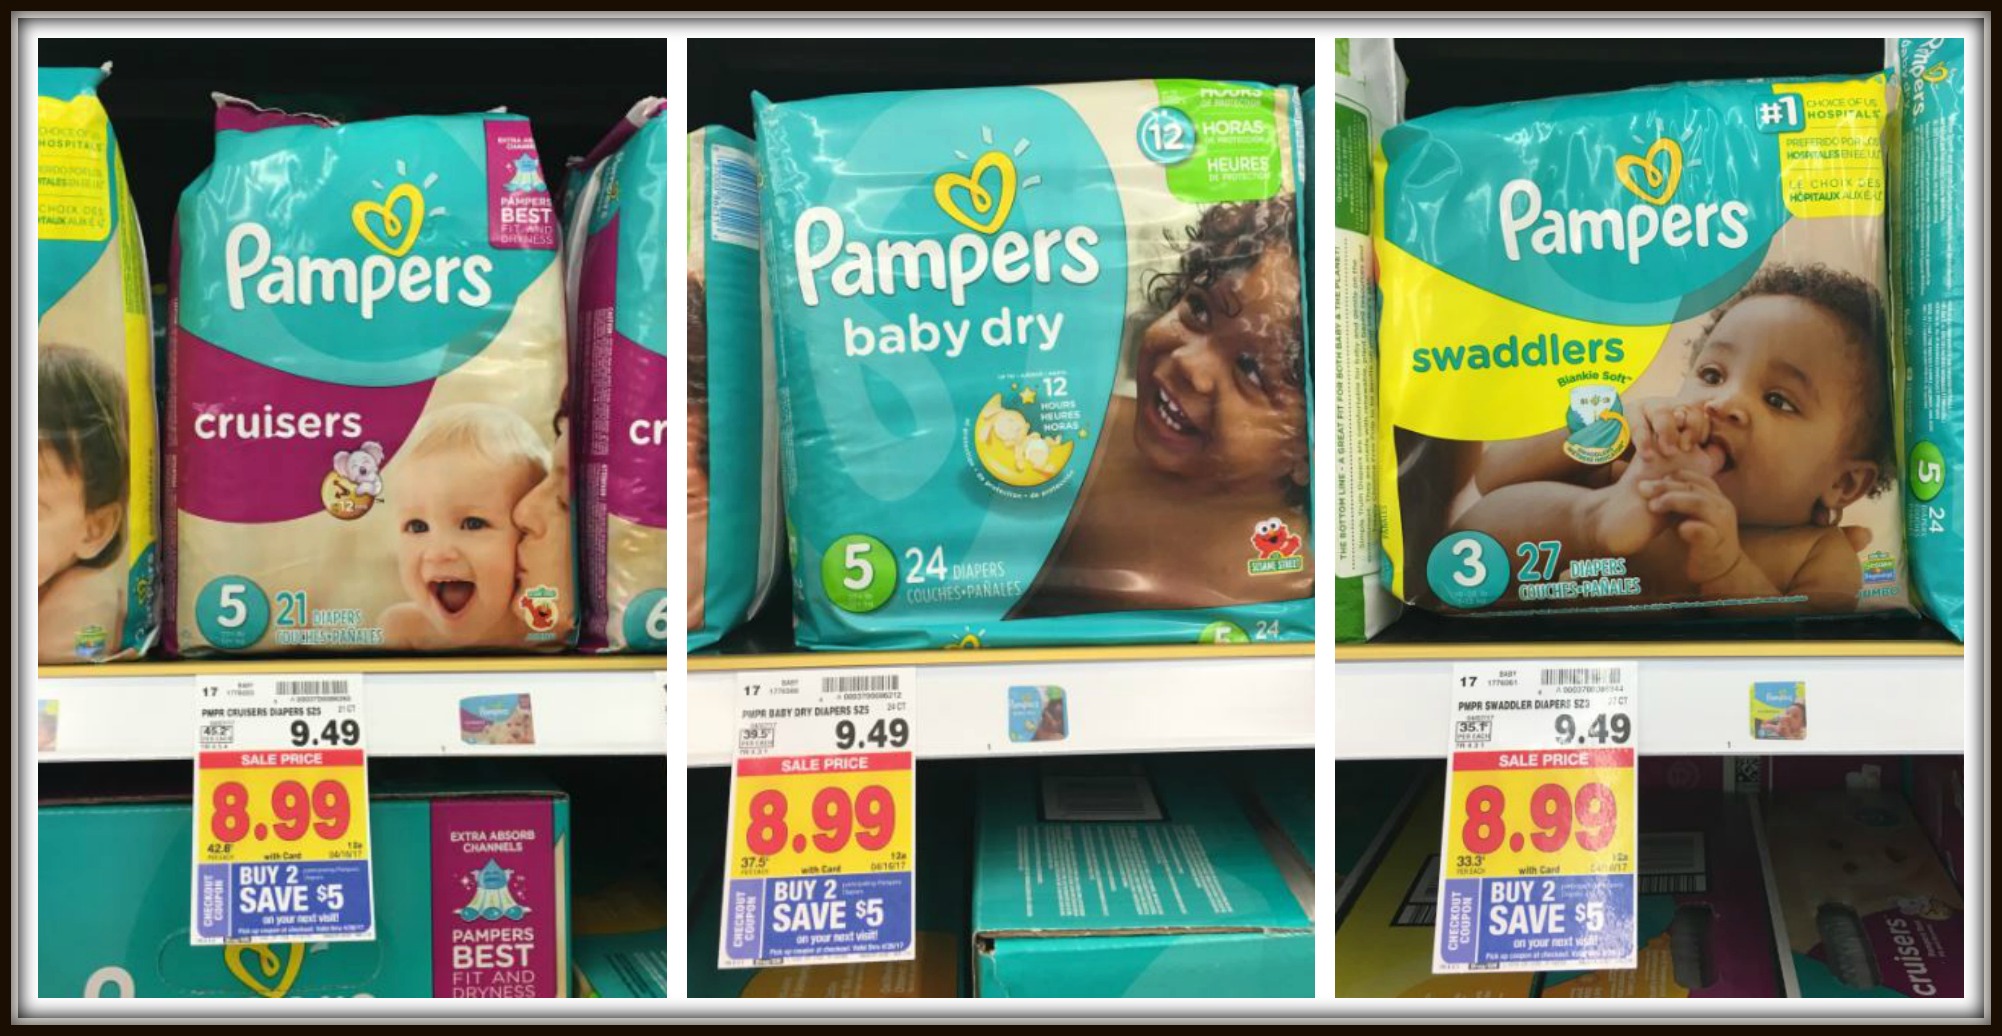 new-pampers-coupons-for-catalina-diapers-only-4-99-each-kroger-krazy